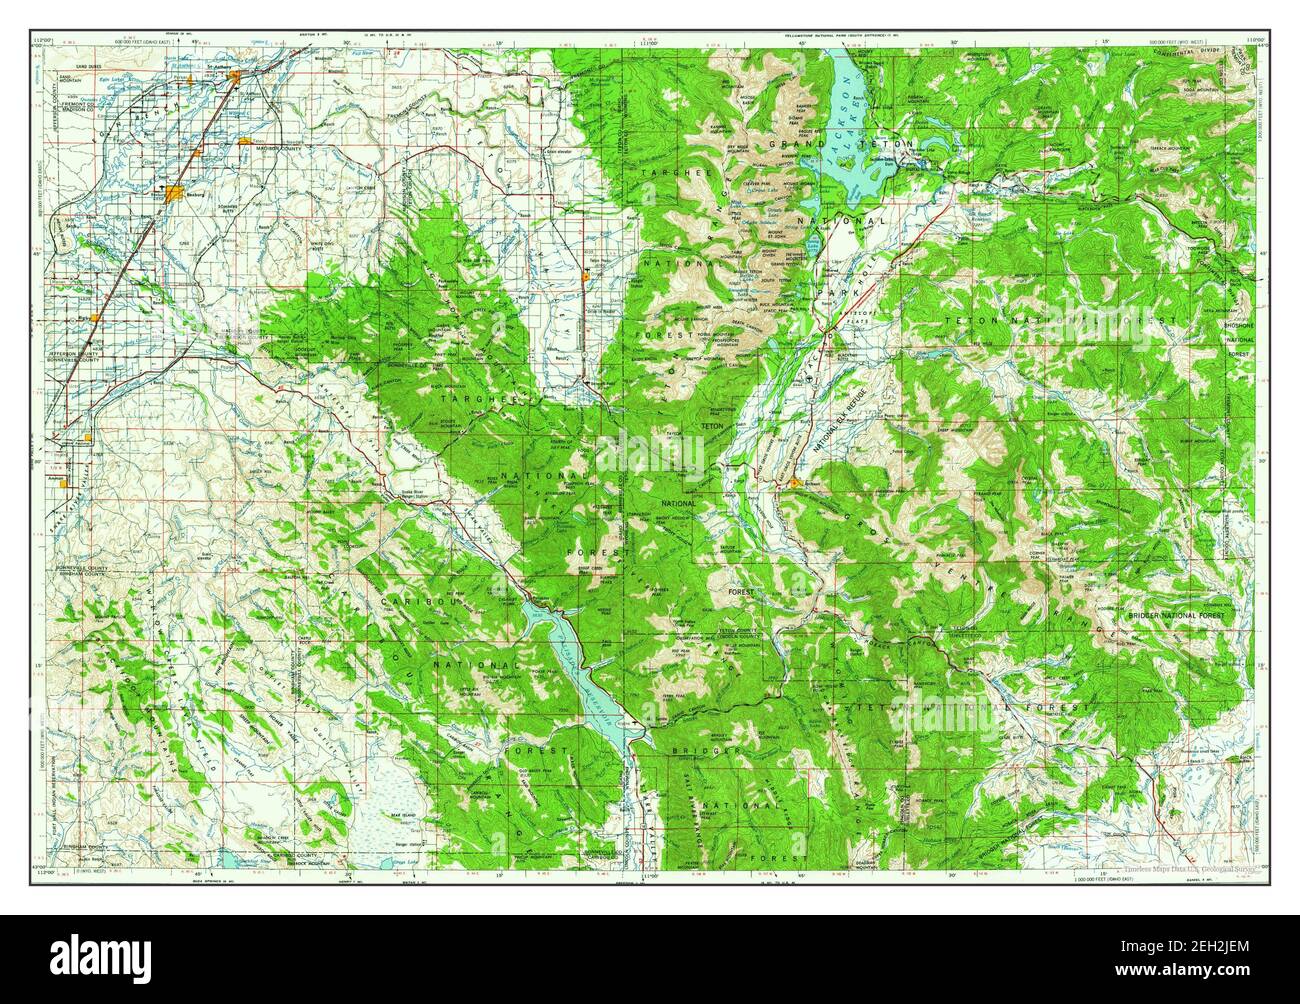 Driggs, Idaho, map 1962, 1:250000, United States of America by Timeless Maps, data U.S. Geological Survey Stock Photo